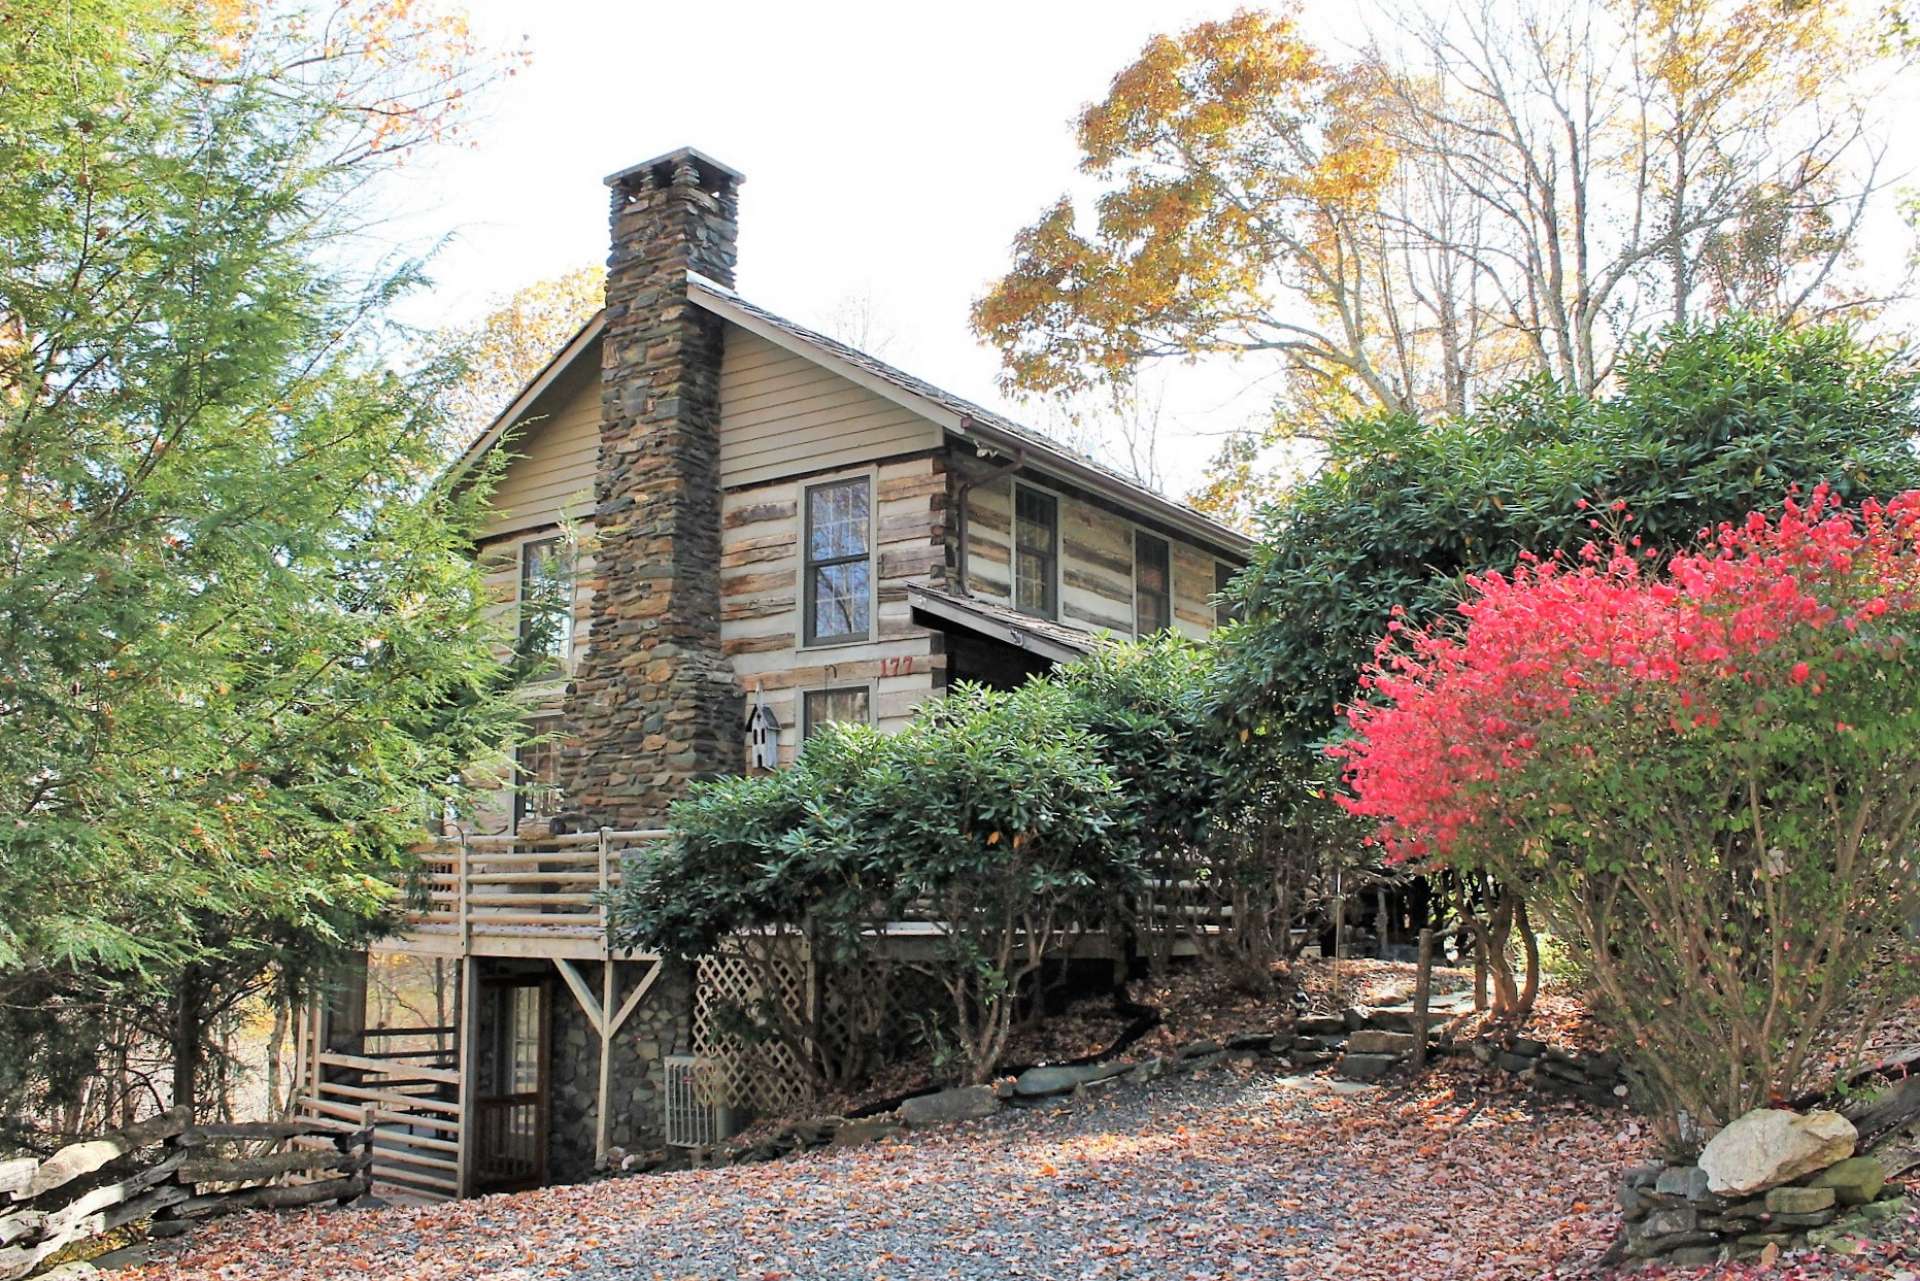 Beautiful shrubs such as rhododendrons and burning bushes provide a scenic entrance. The level driveway and native stone walkway leads you to the covered front porch.